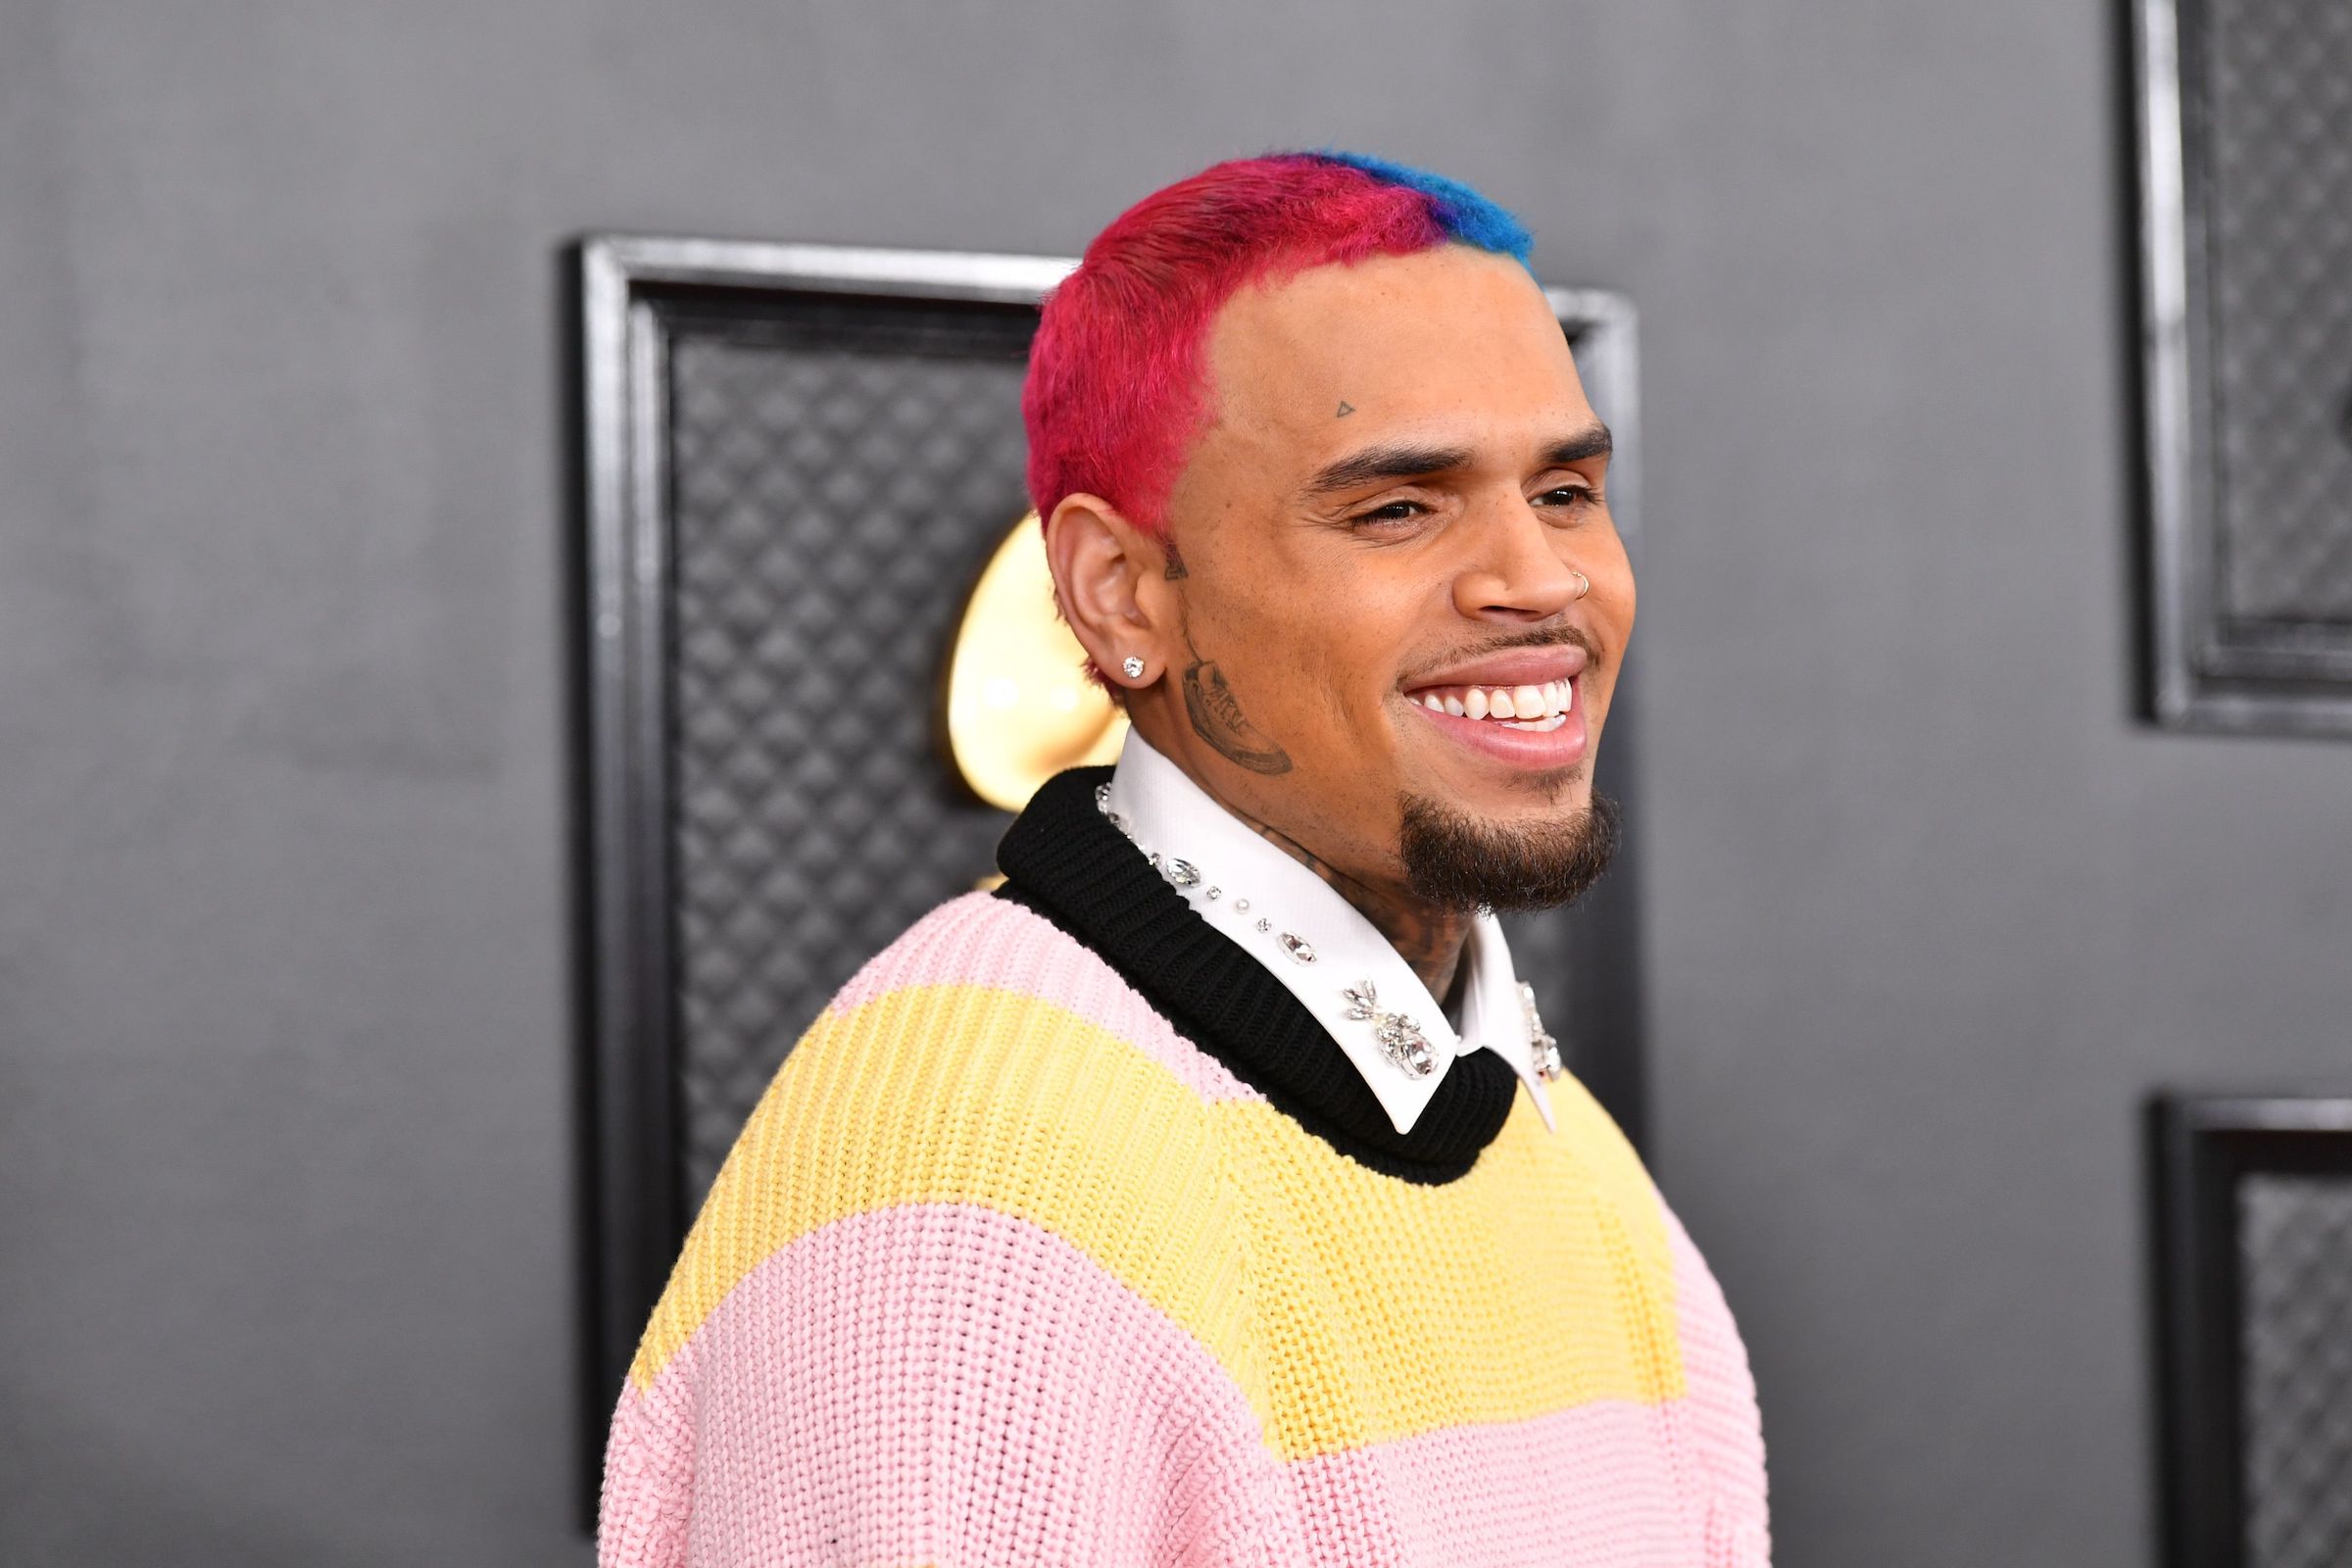 Chris Brown smiling wearing a yellow and pink jacket